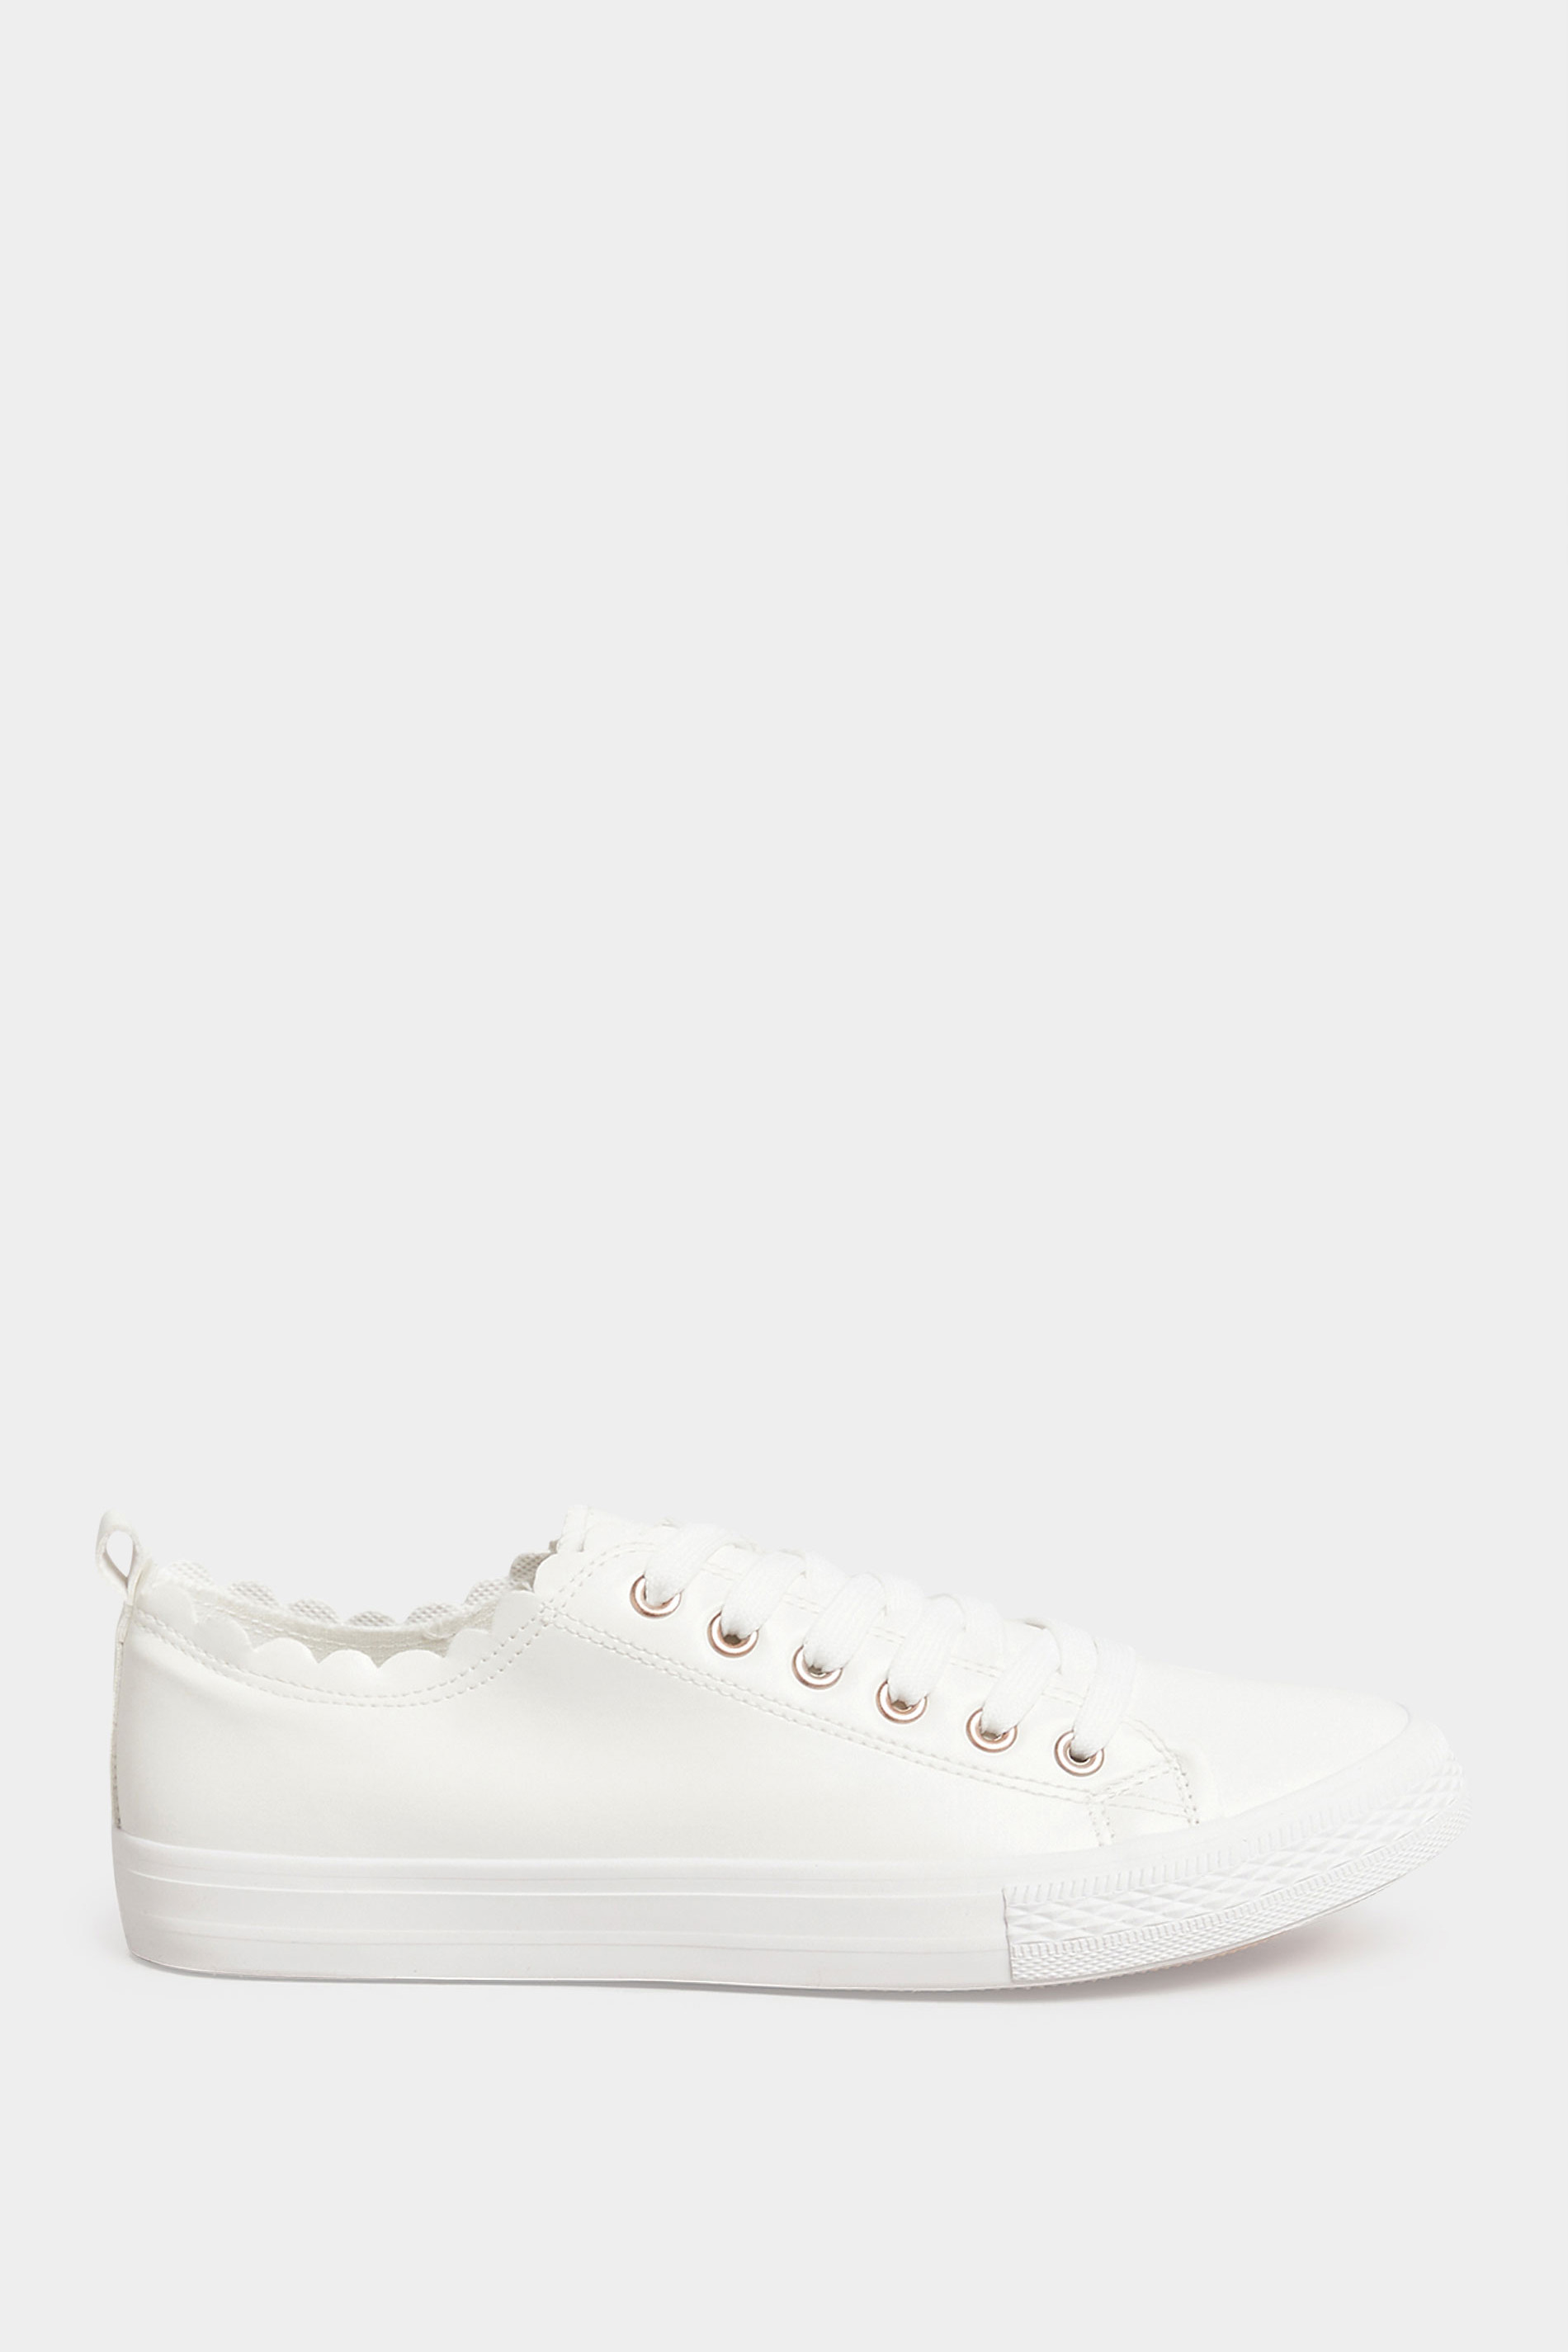 White Scalloped Edge Trainers In Wide E Fit | Yours Clothing 3